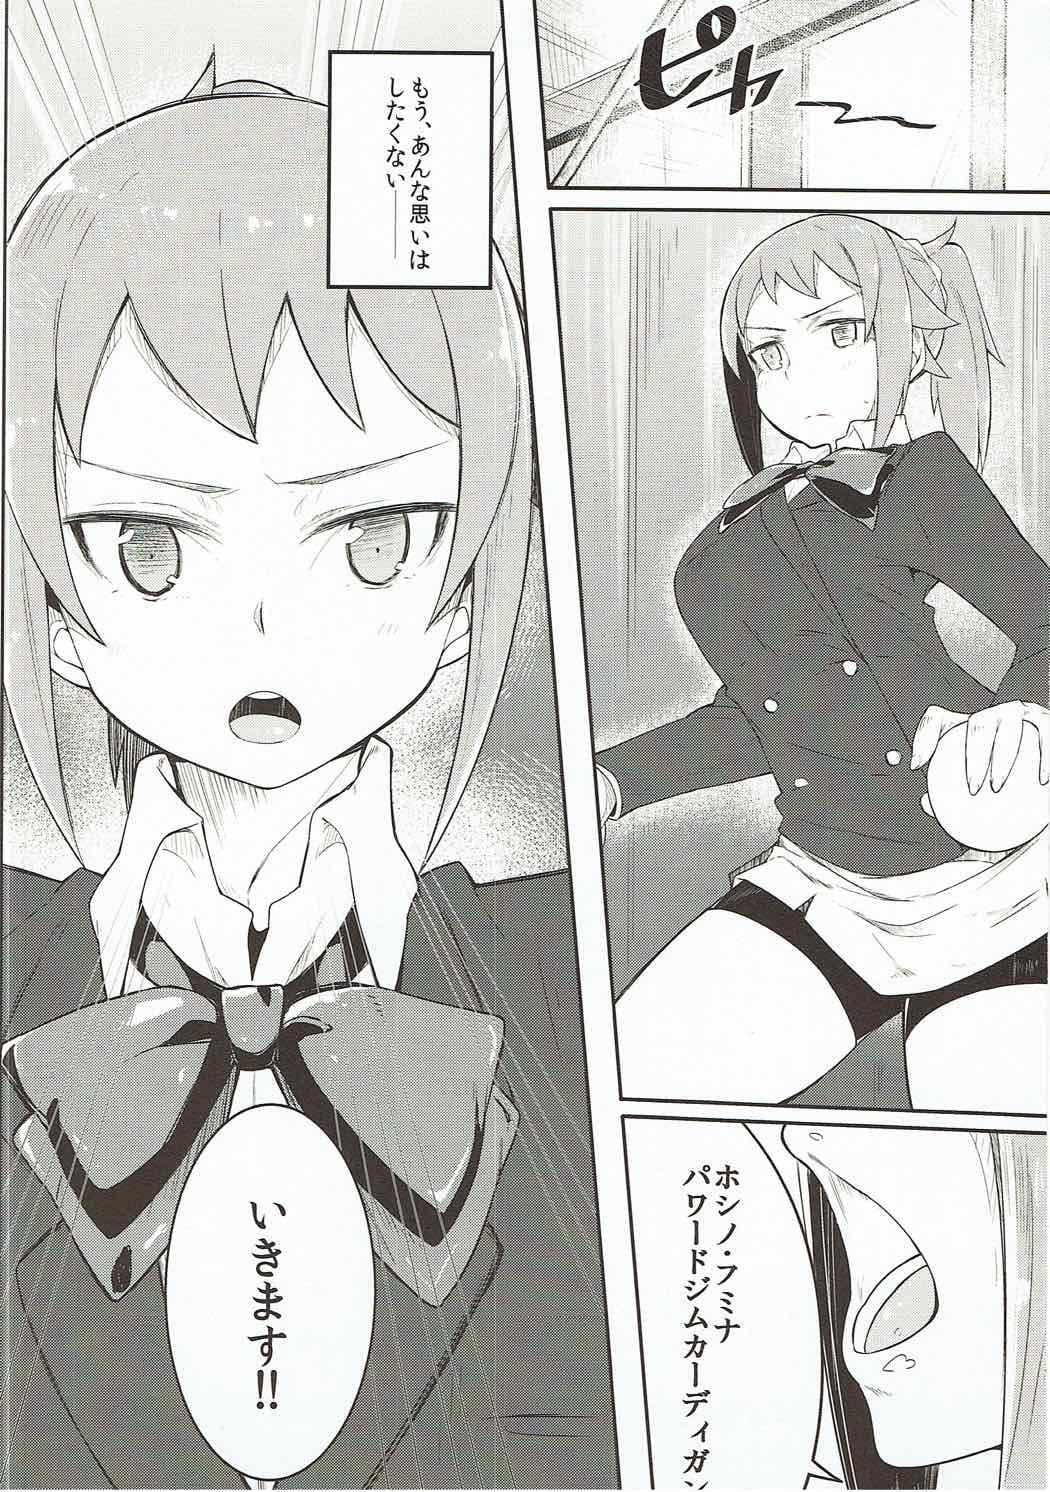 Petite Girl Porn Obedience - Gundam build fighters try Sapphic - Page 3